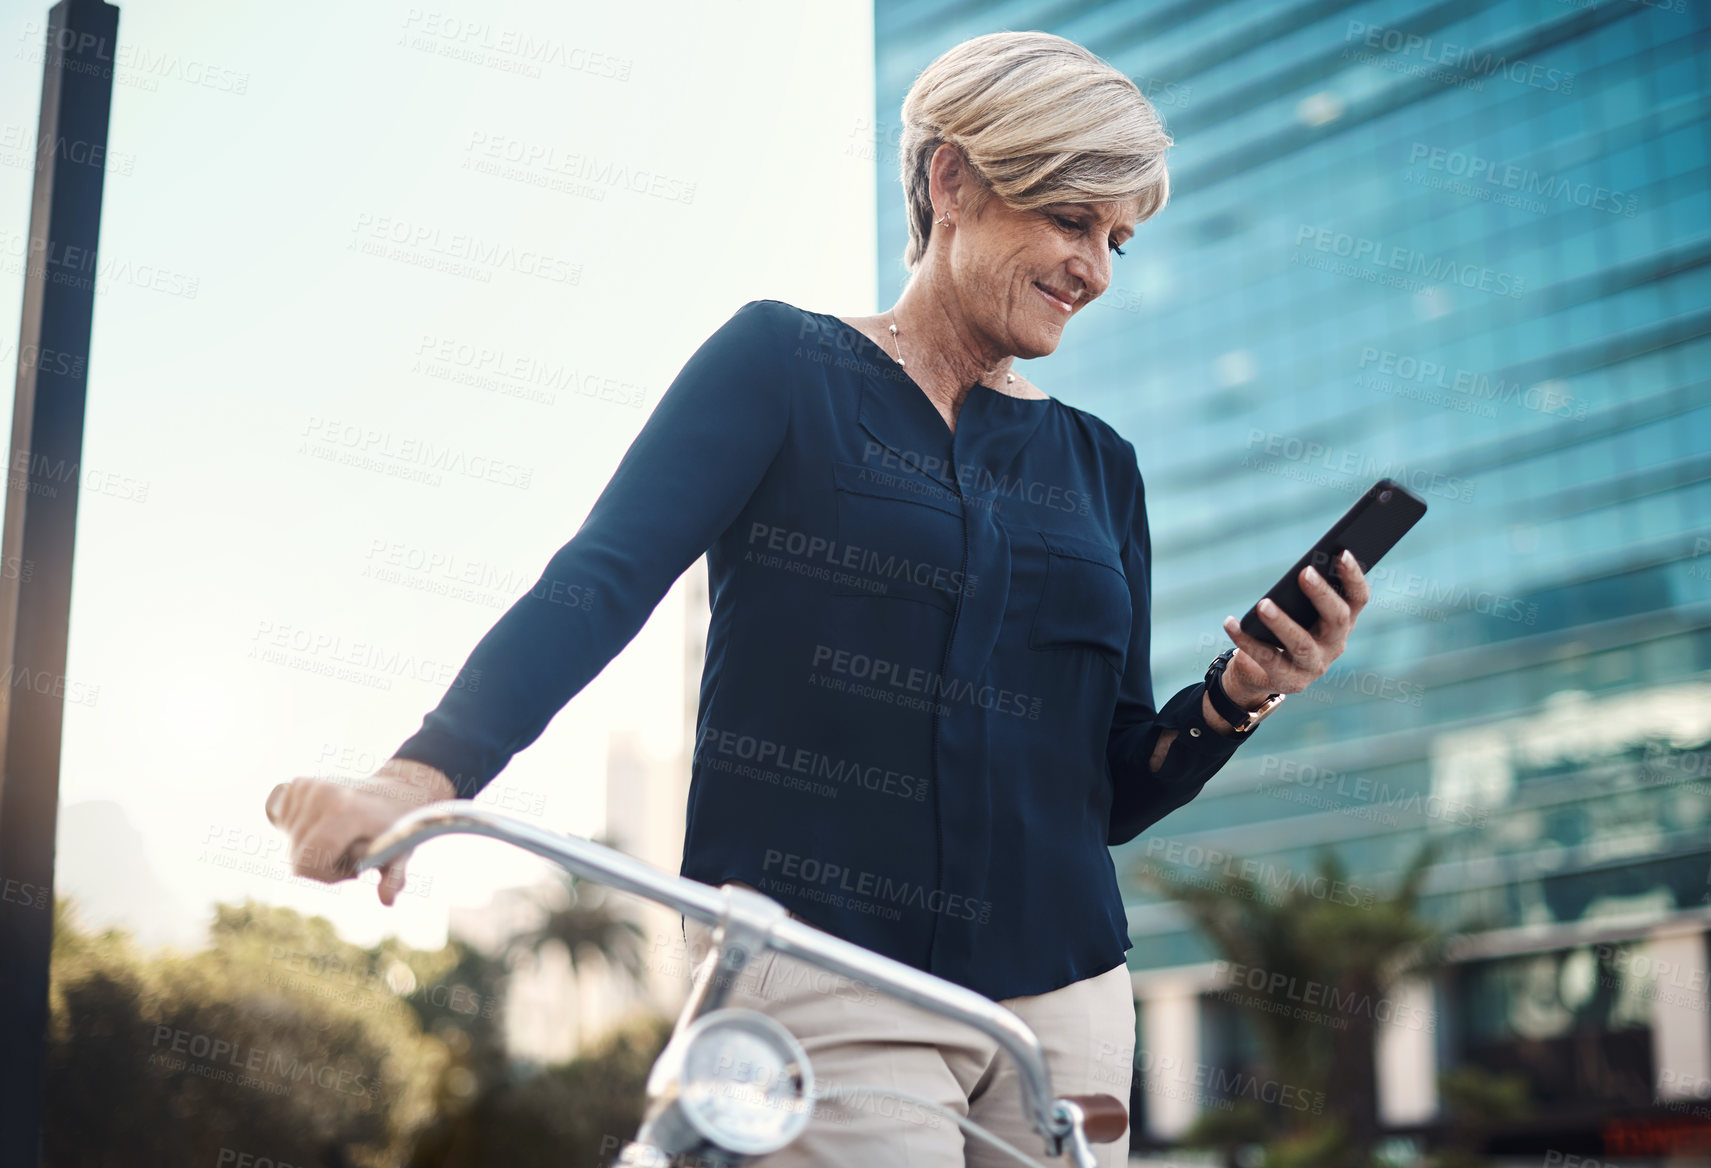 Buy stock photo Shot of a mature businesswoman using a smartphone while traveling with a bicycle through the city